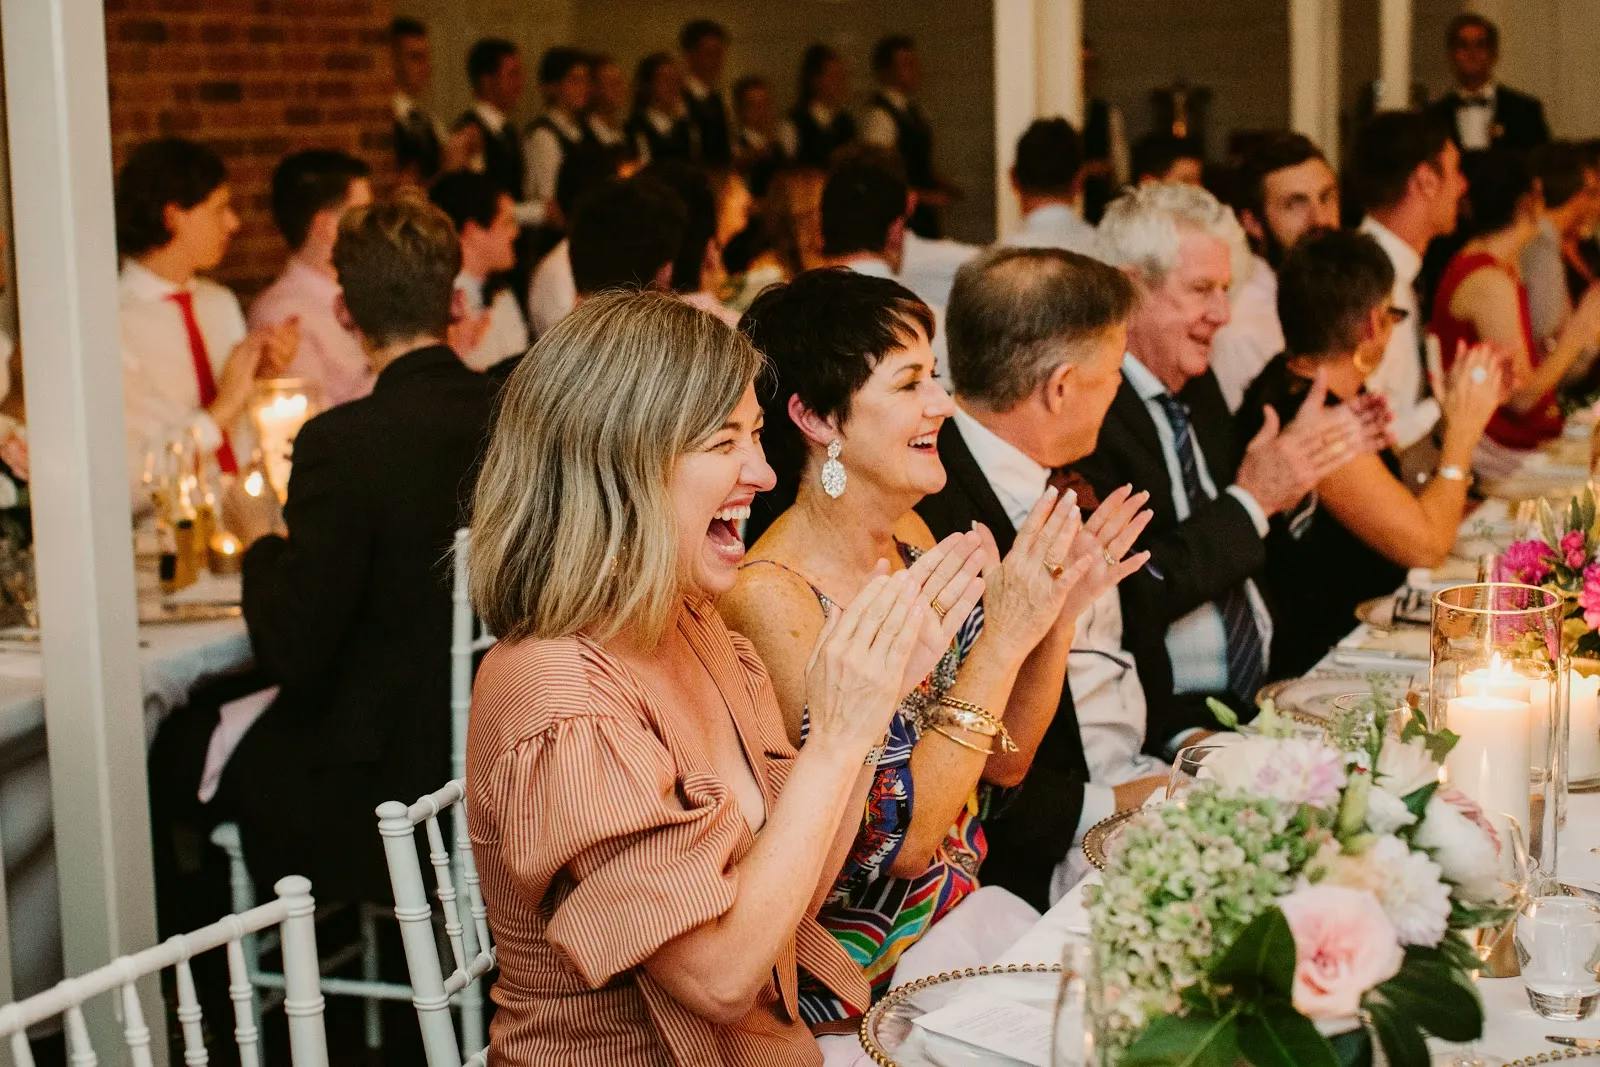 A group of people seated at a long, elegantly decorated table, smiling and clapping. The atmosphere is lively and festive, with floral centerpieces and candles. A brick wall and tuxedo-clad staff are visible in the background.